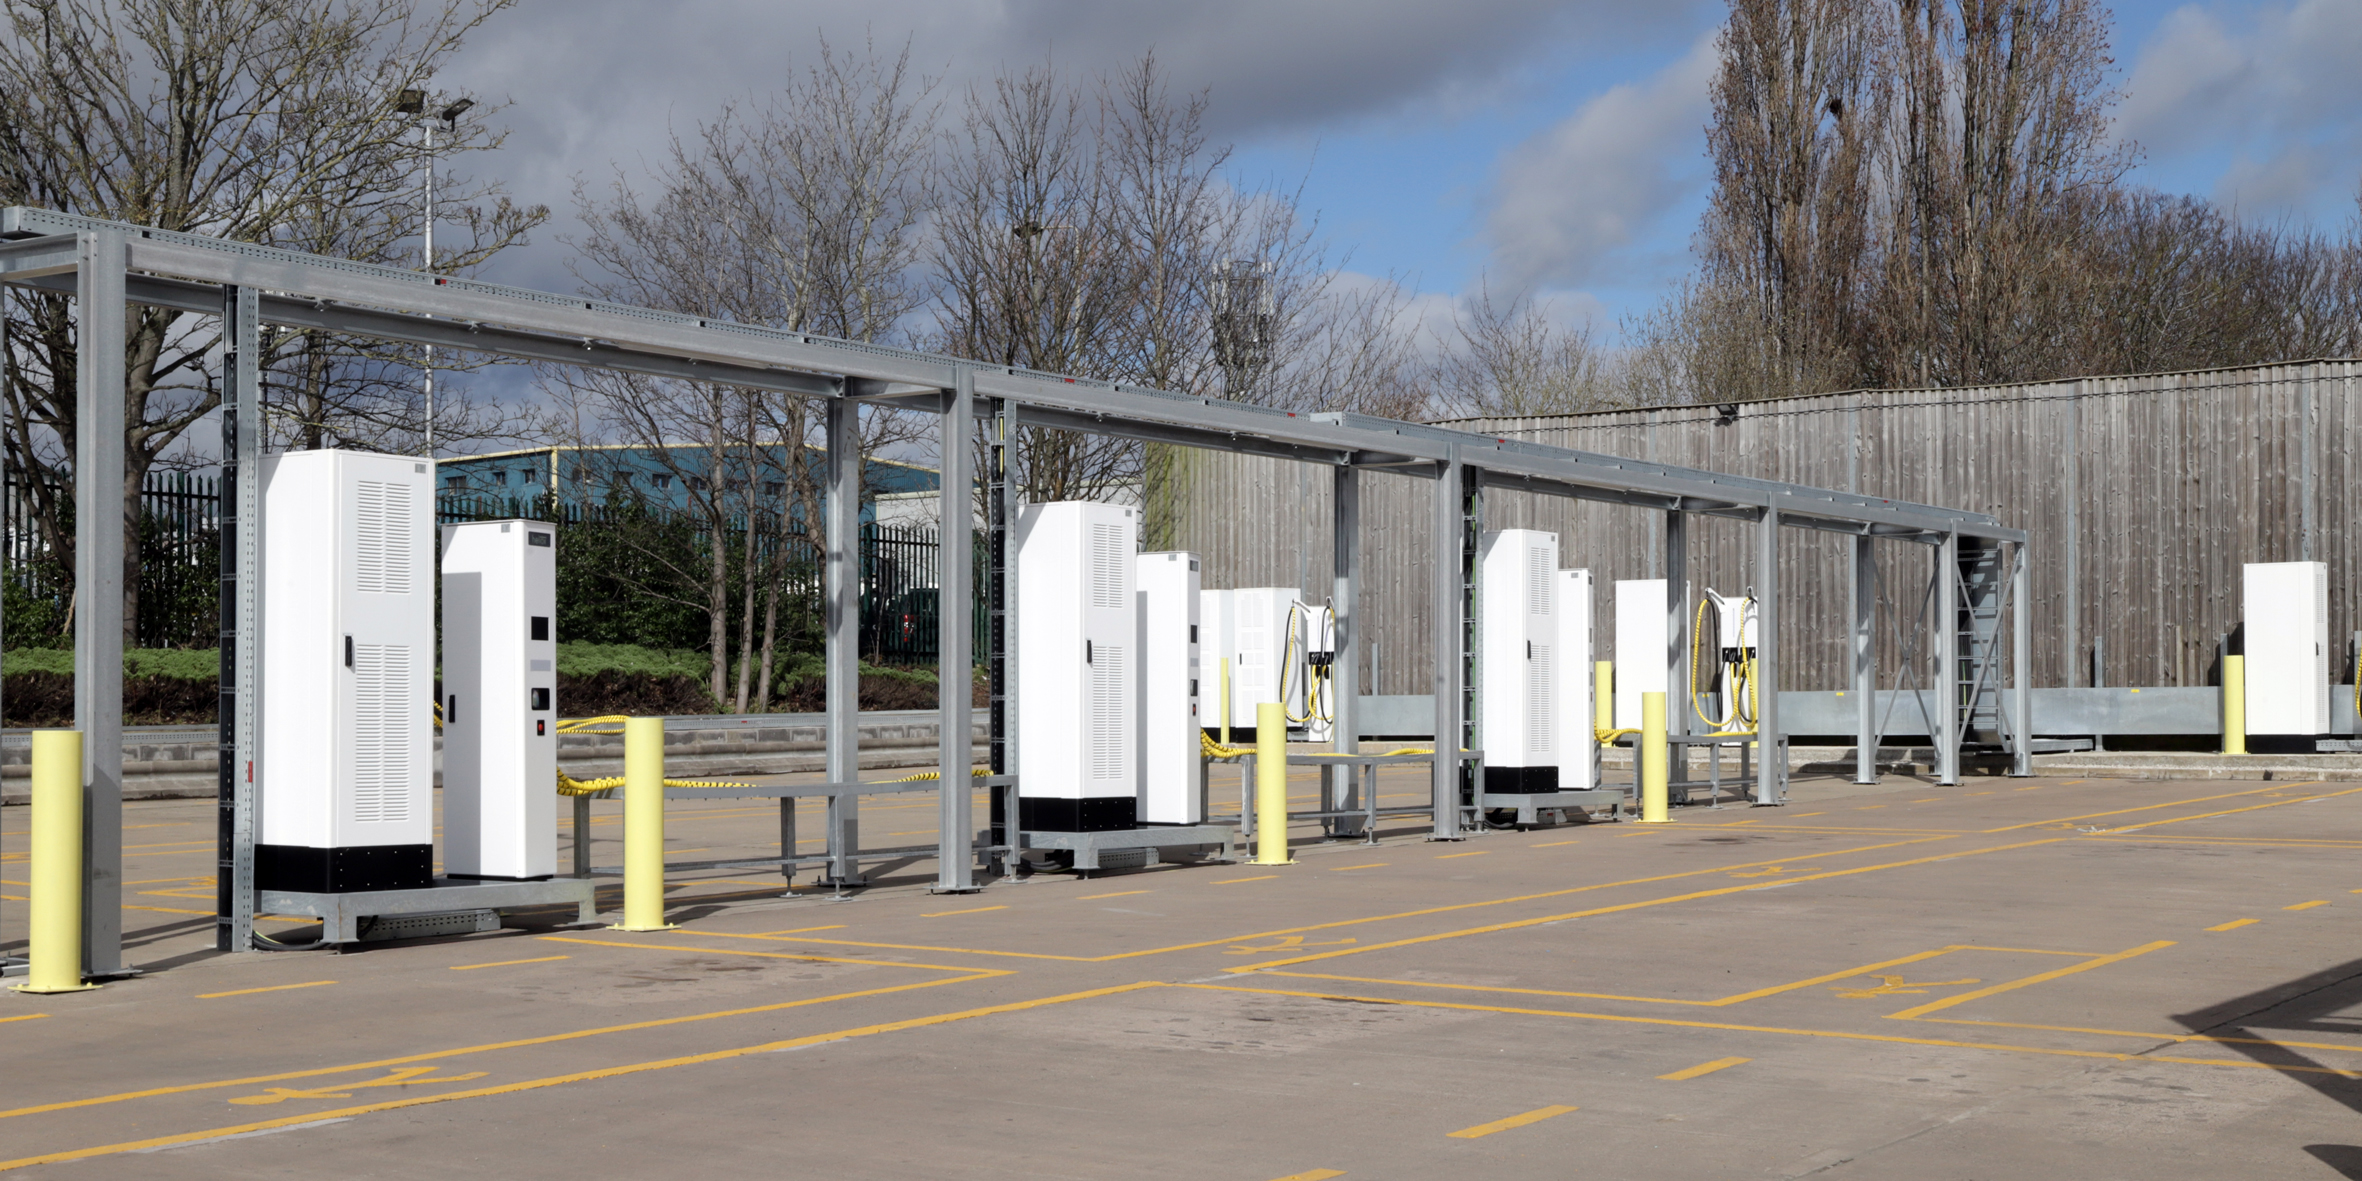 Brookes Contracting have completed the installation of the first phase charging islands with 22 Heliox dual-headed chargers